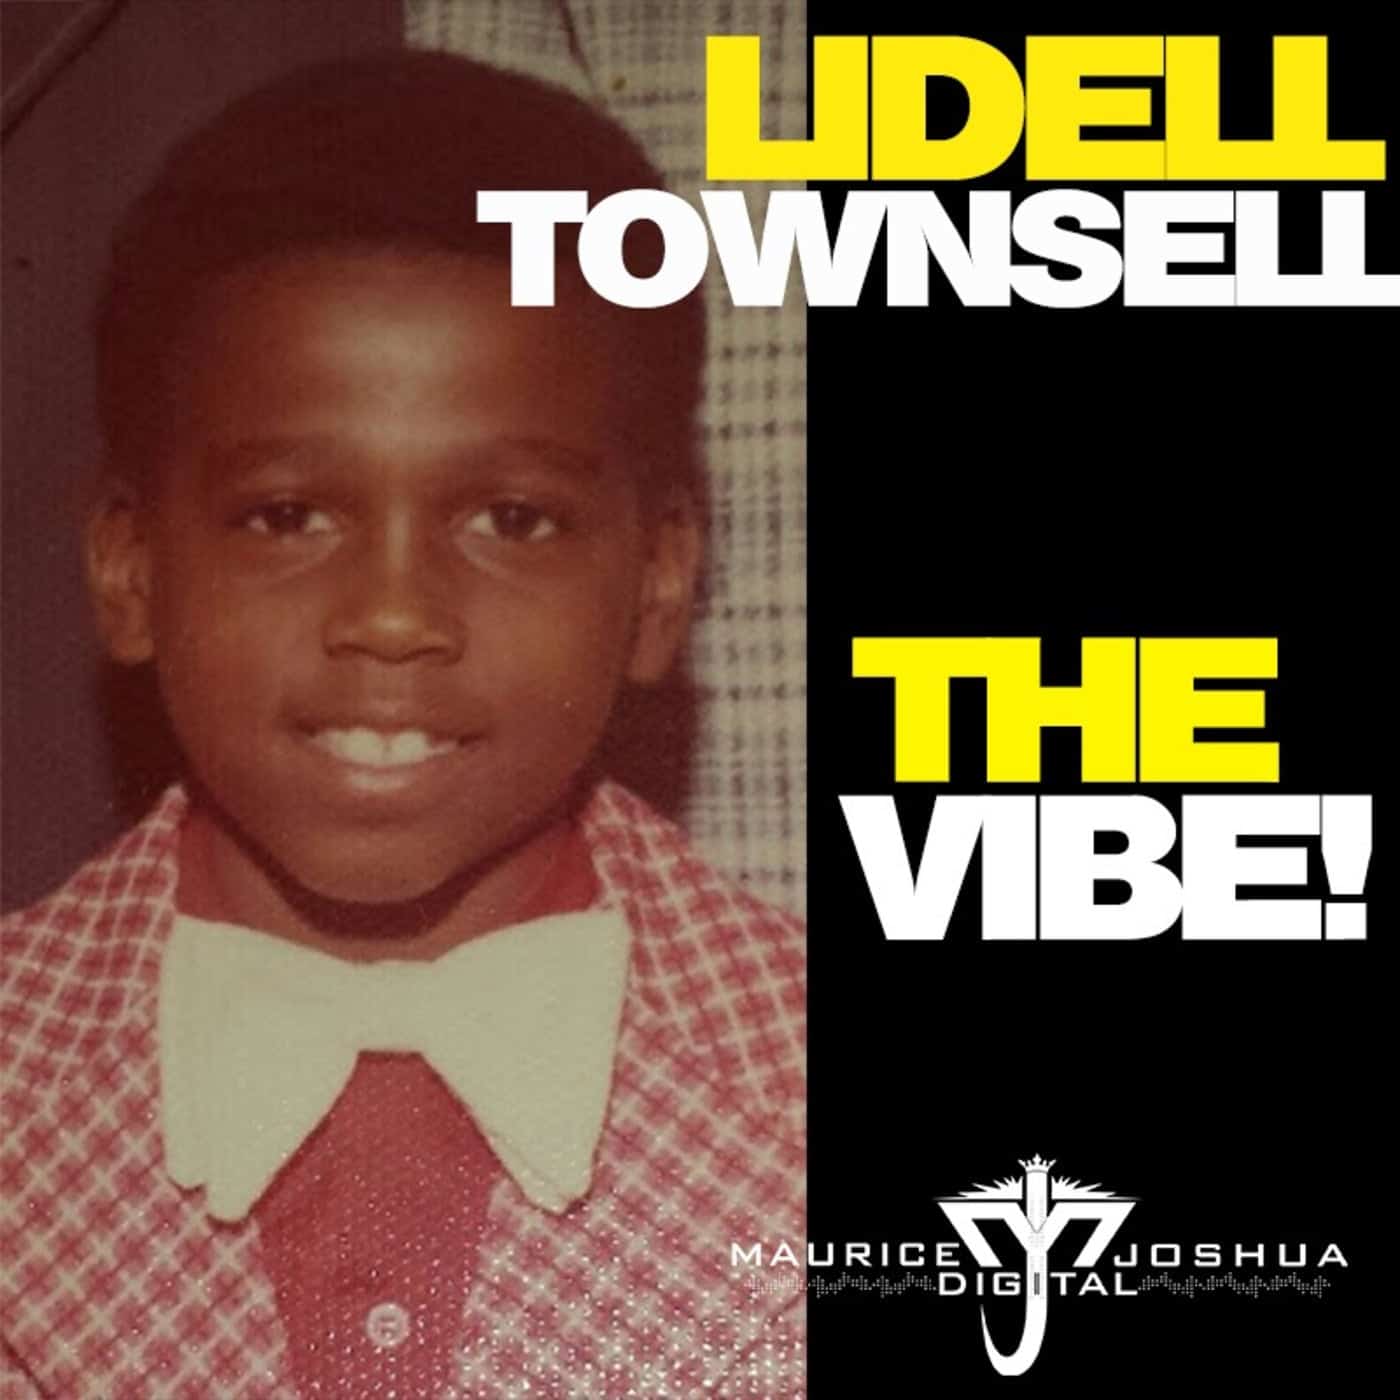 image cover: Lidell Townsell - The Vibe on Maurice Joshua Digital